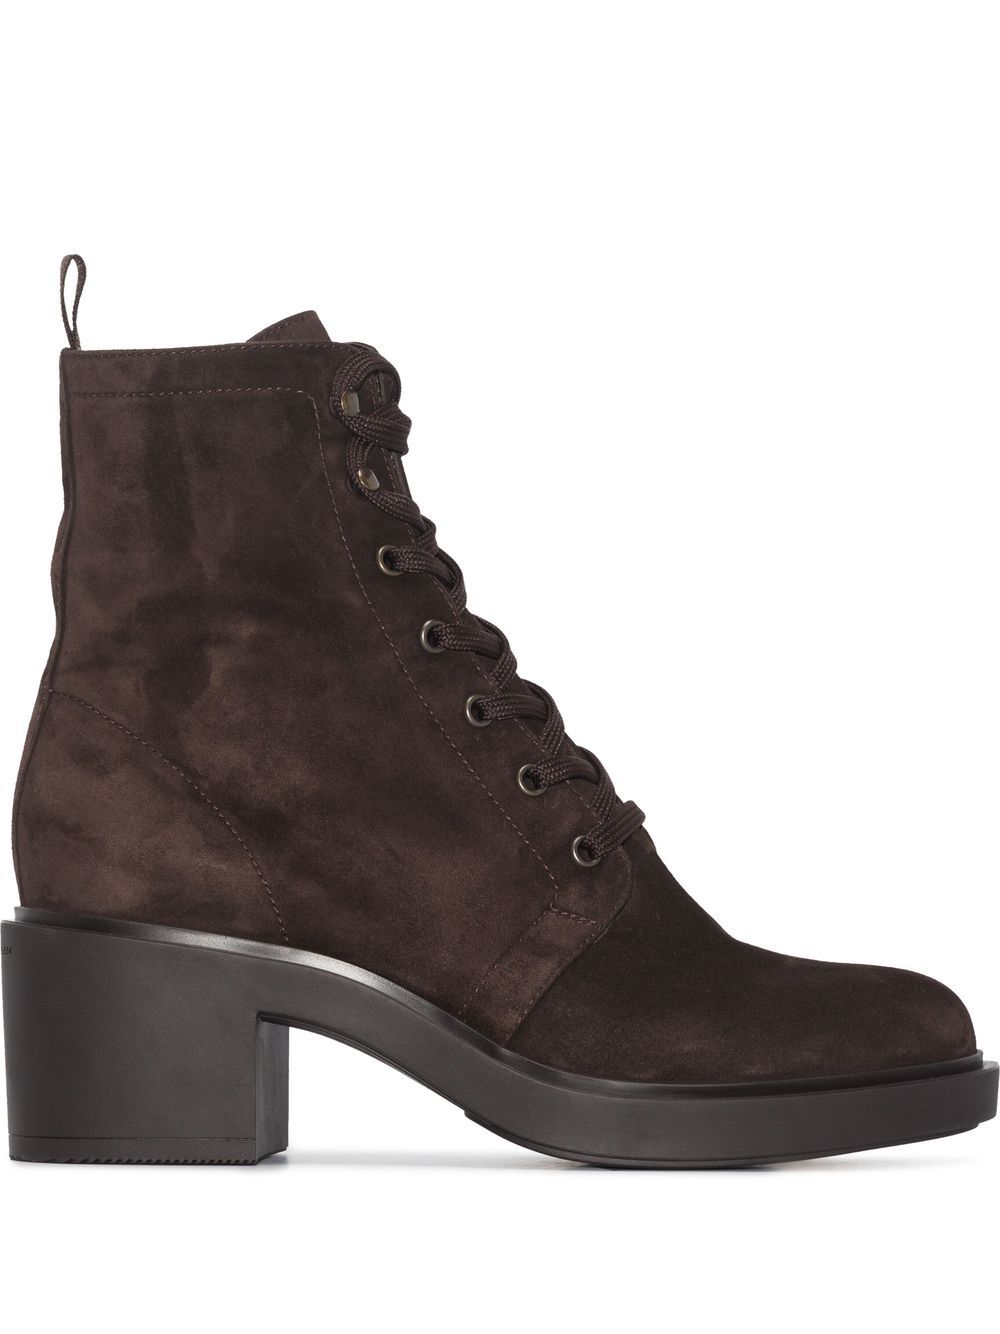 Gianvito Rossi Foster 45mm suede lace-up boots - Brown von Gianvito Rossi